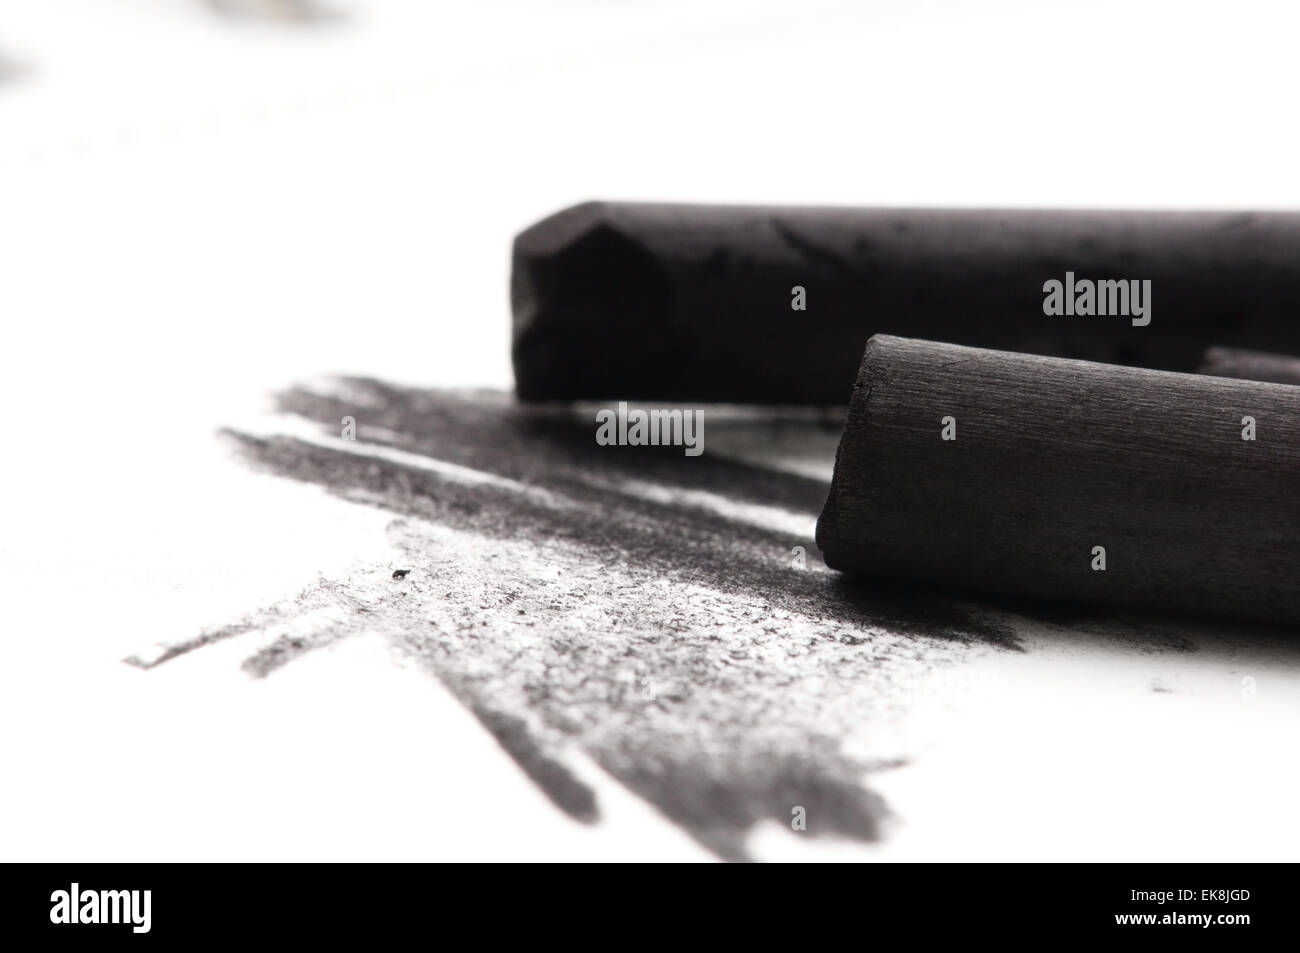 black charcoal with smudge Stock Photo